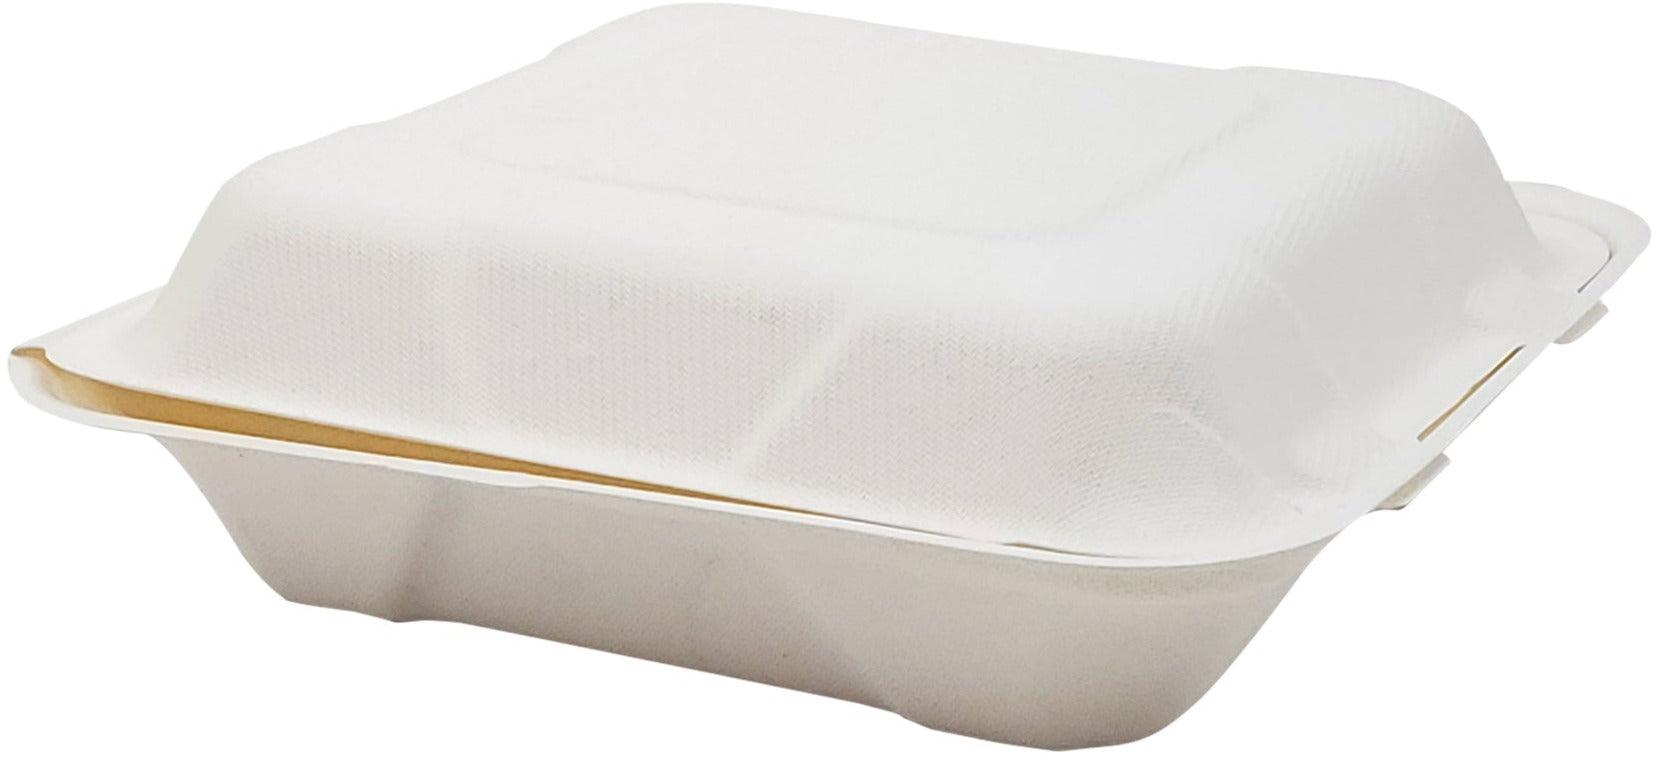 6x6 Clamshell Takeout Box (50 Count) Foam Food Containers by Stock Your Home